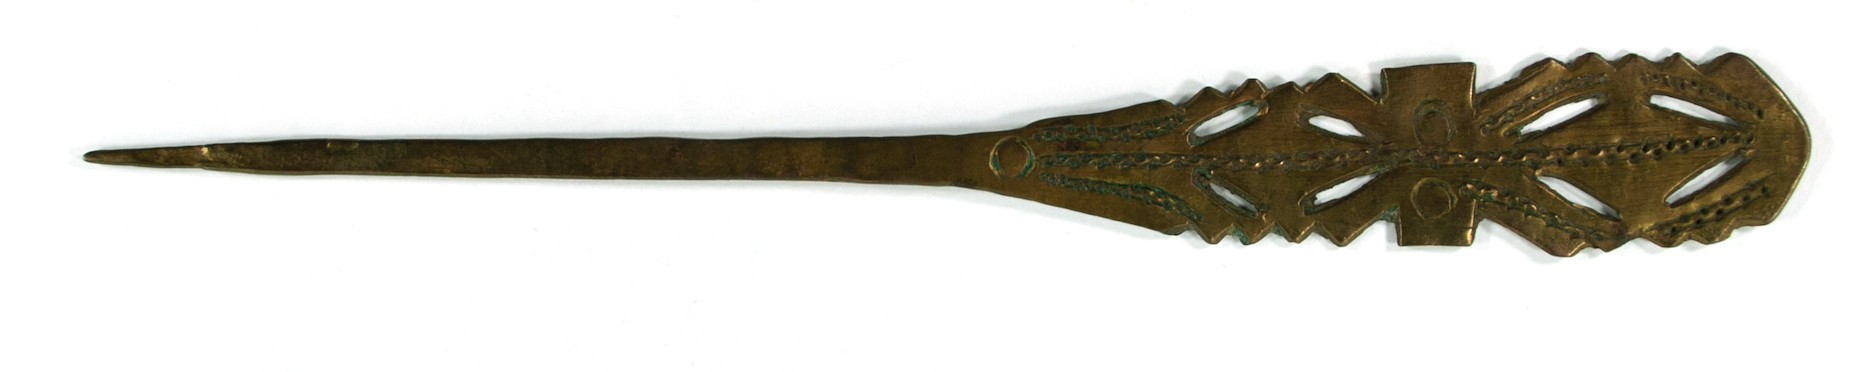 A brass hairpin with the design of the top segment split into three sections; oval shaped with jagged edges and negative spaces inside, an oblong with two circles, and a similar design to the first leading into the hairpin point/taper.